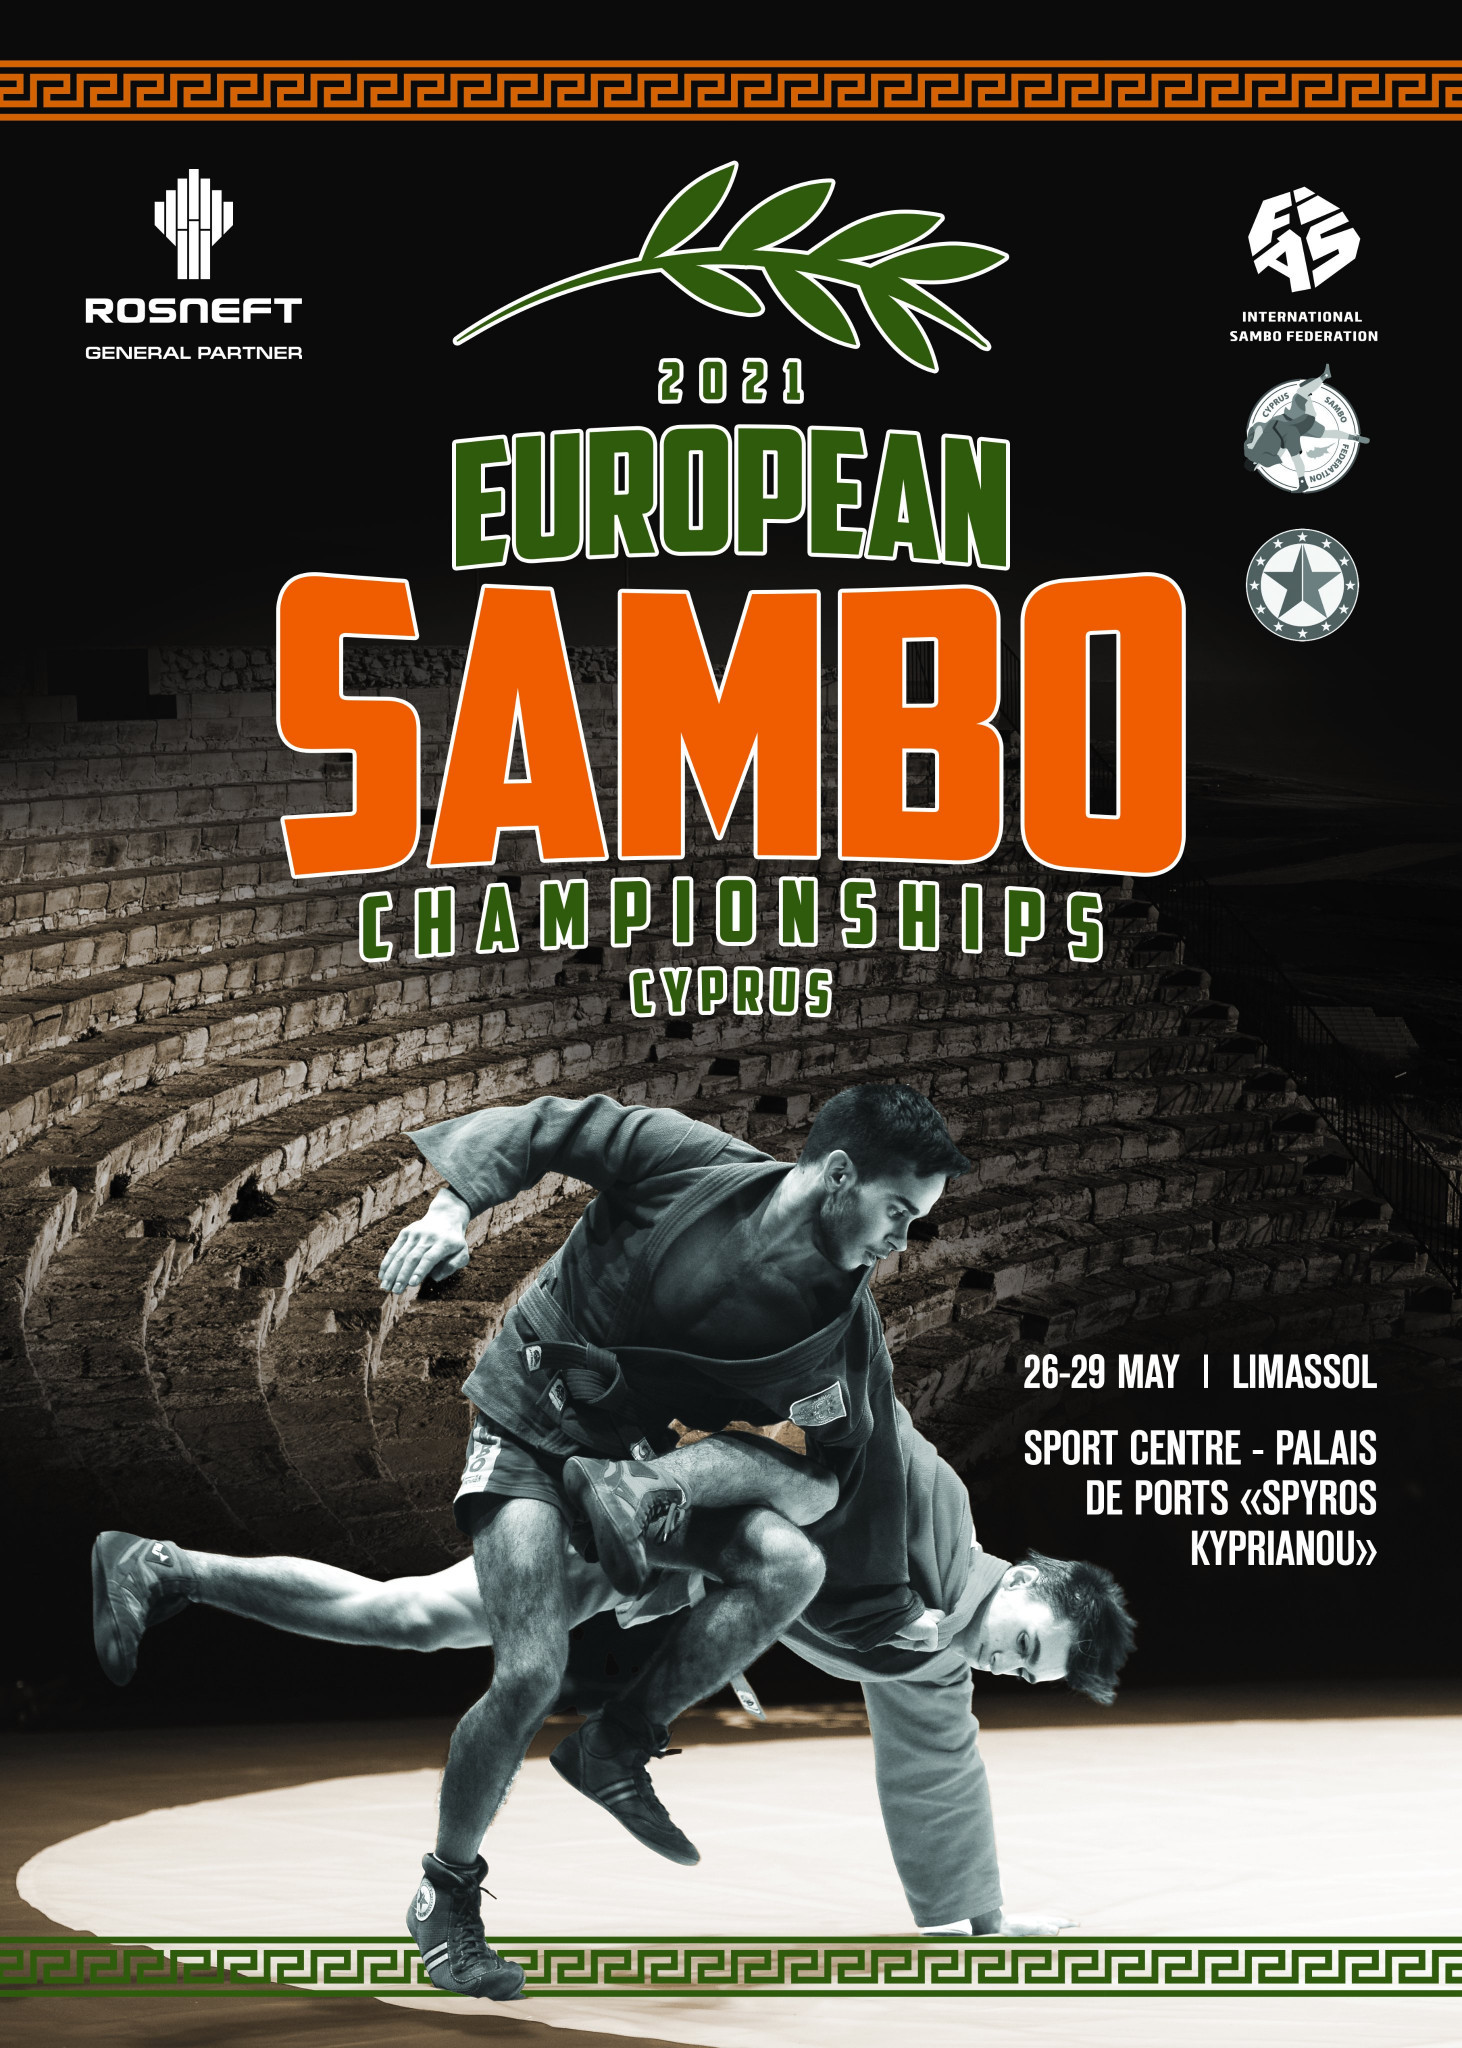 Total of 28 nations to compete at European Sambo Championships